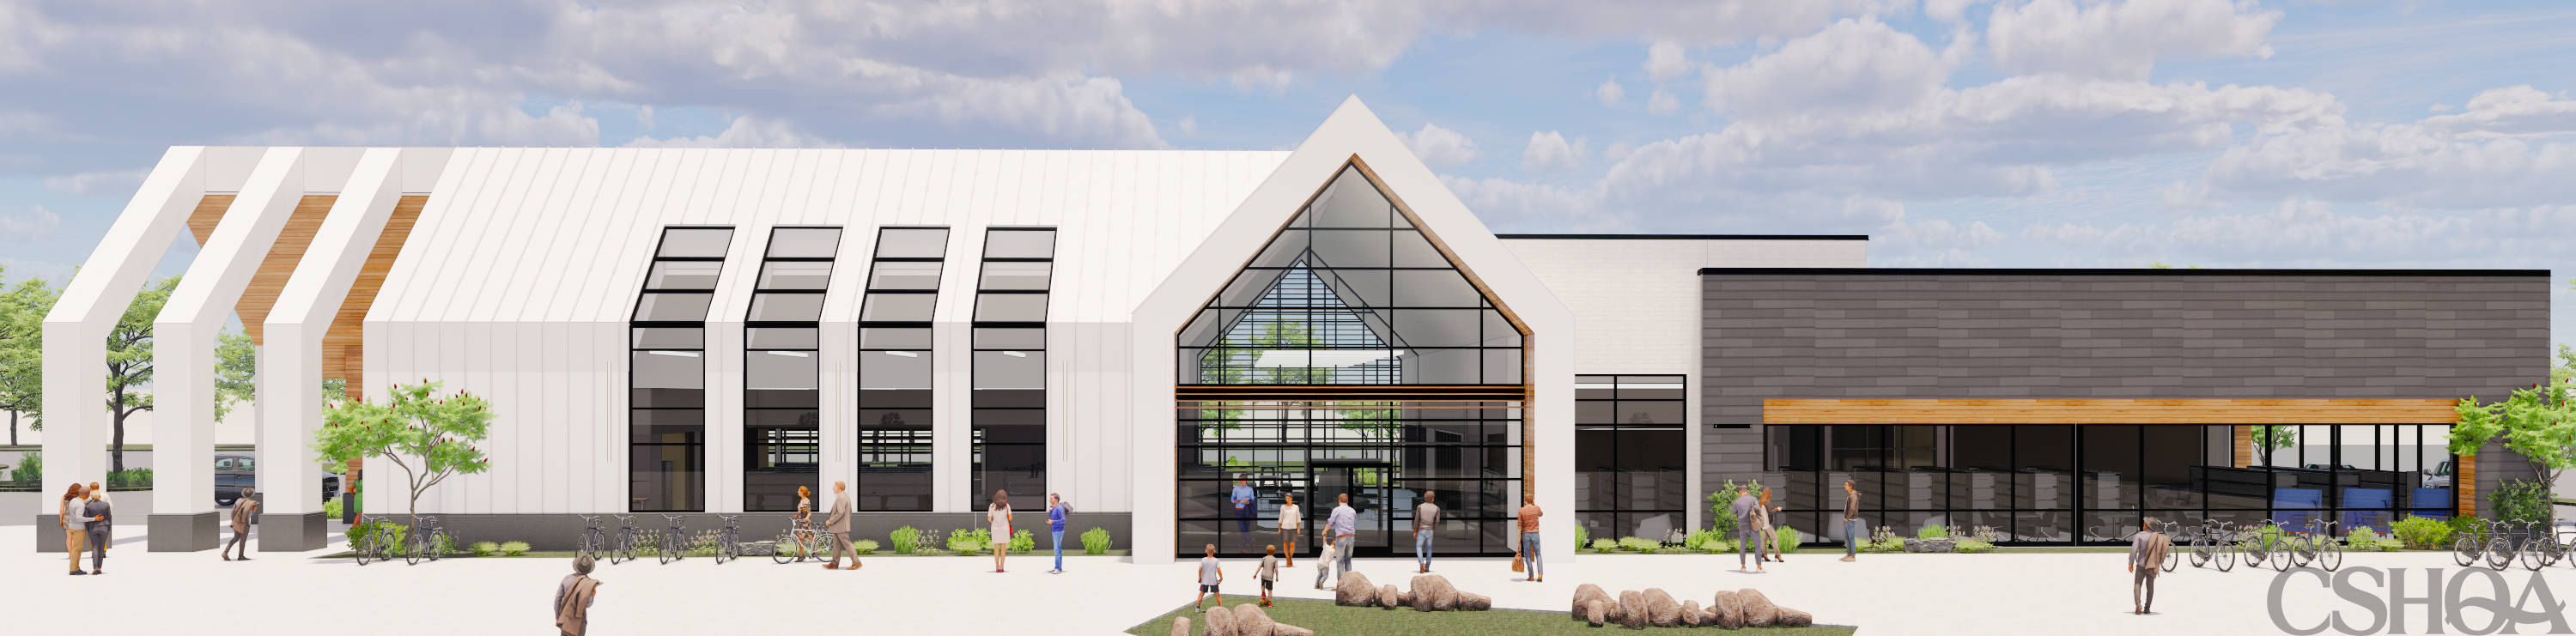 Rendering of the front of the Orchard Park library